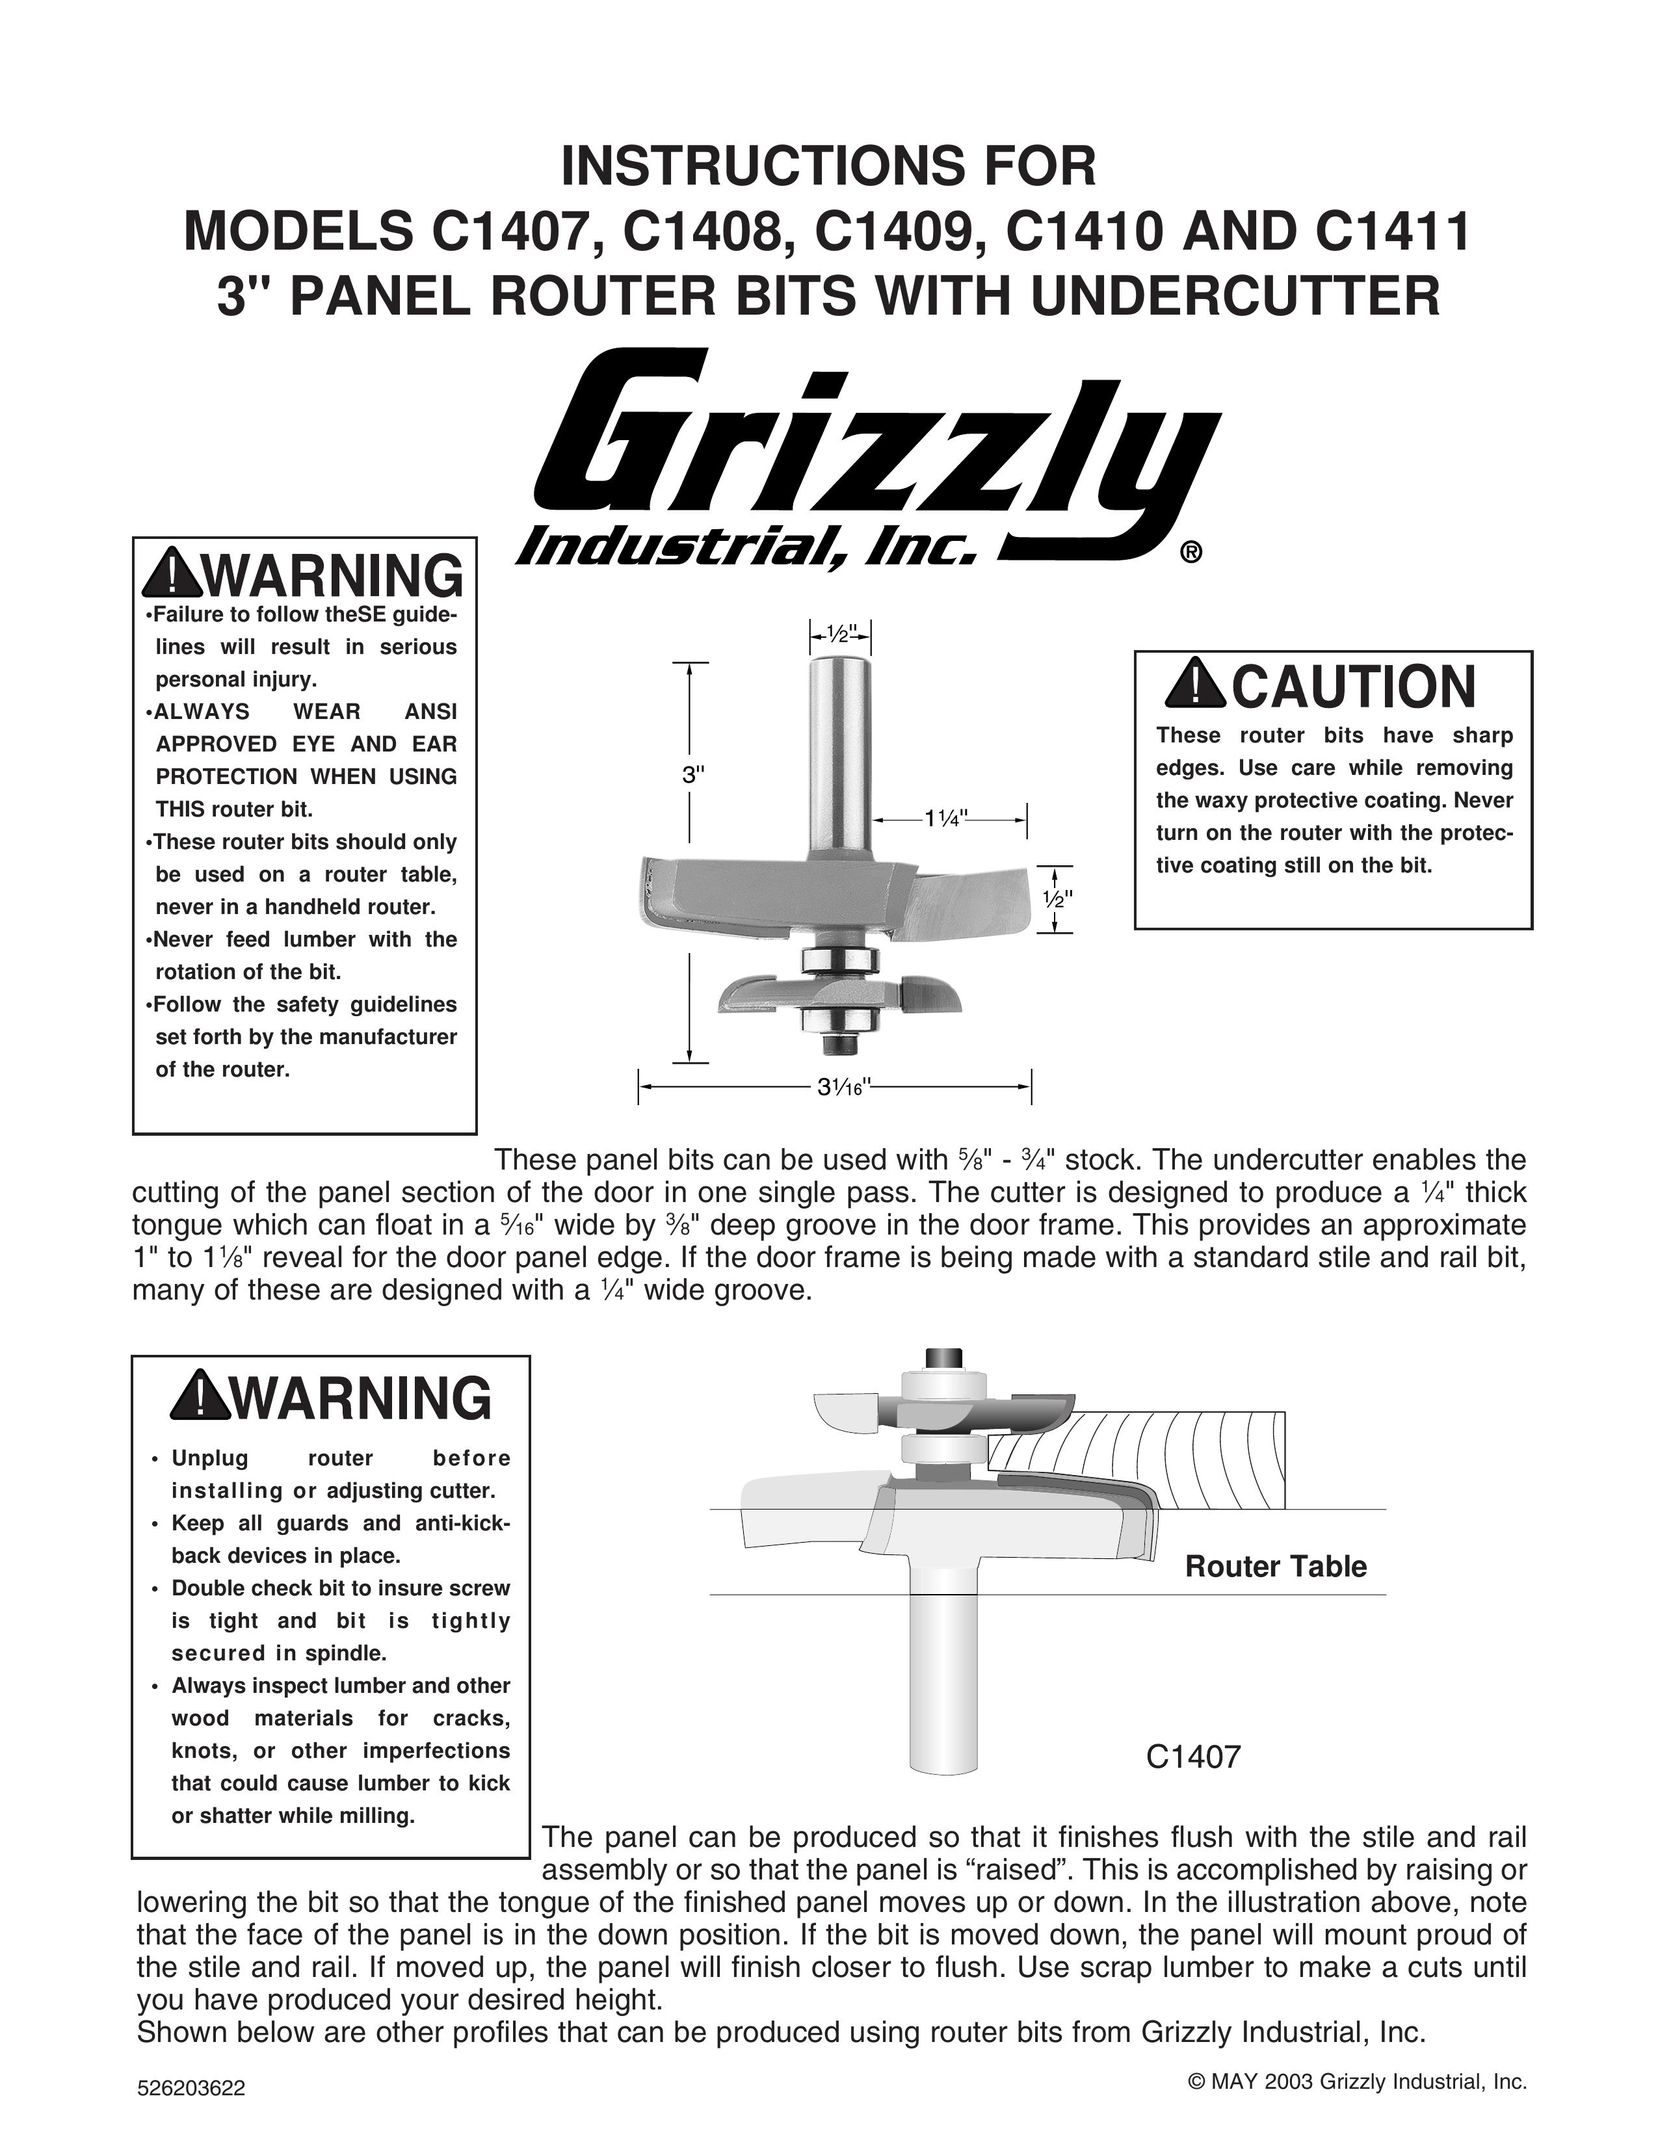 Grizzly C1407 Router User Manual